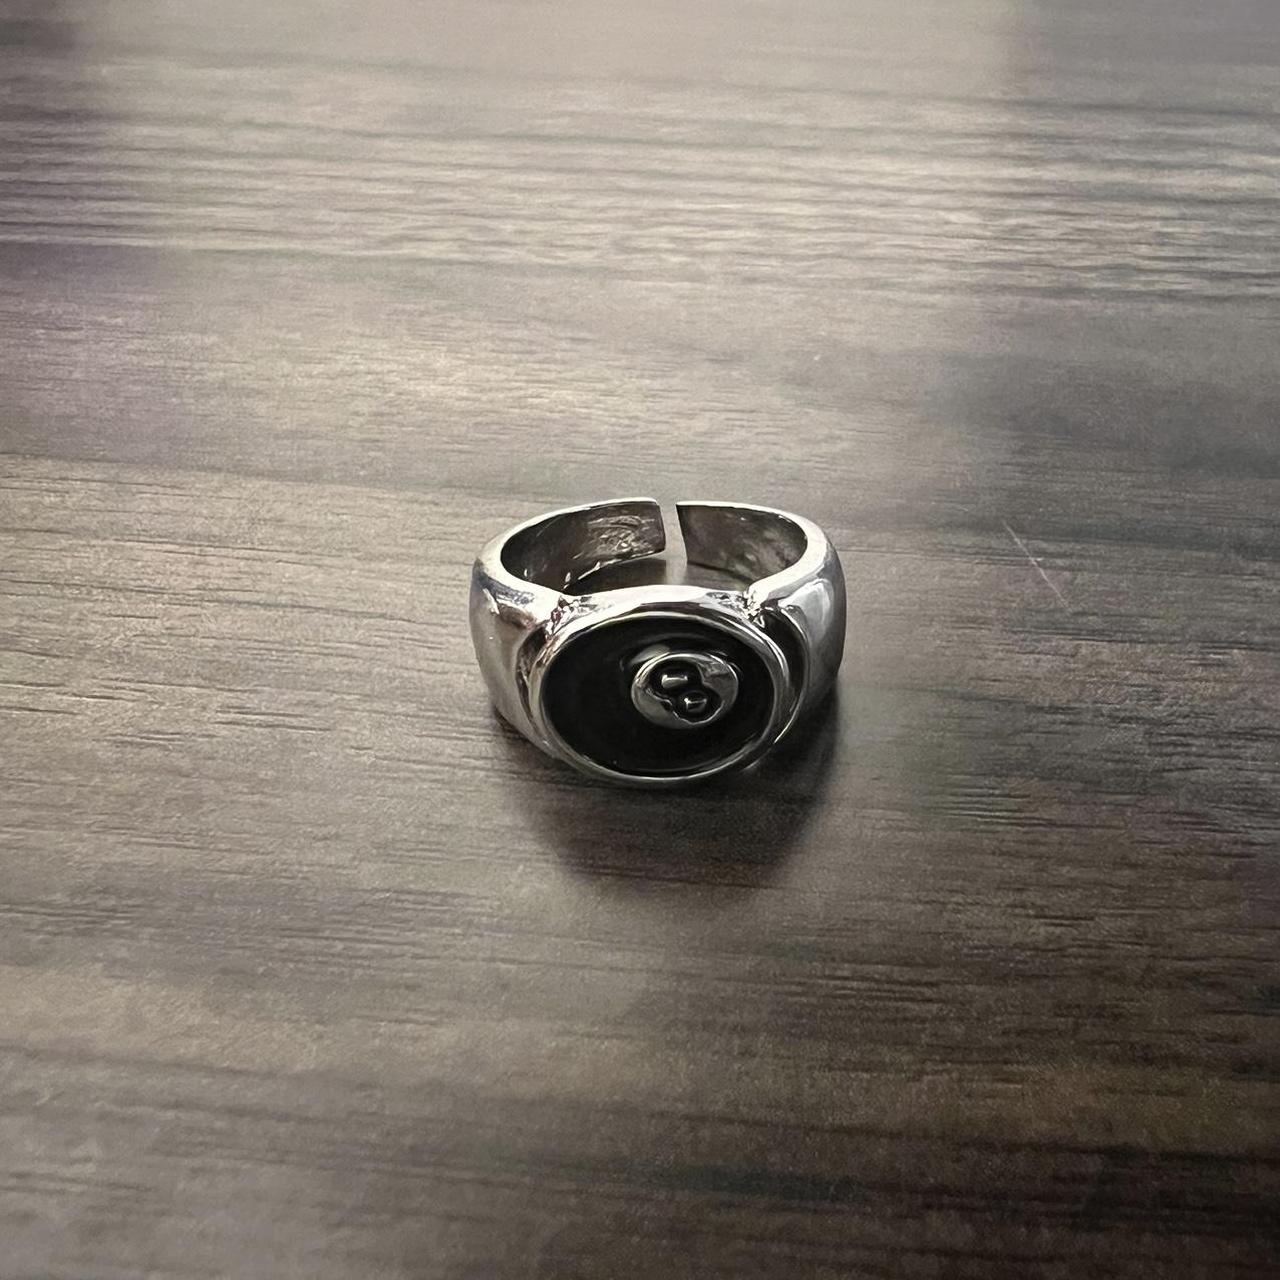 8 ball adjustable ring 🎱⛓️💿 also have a 8ball... - Depop